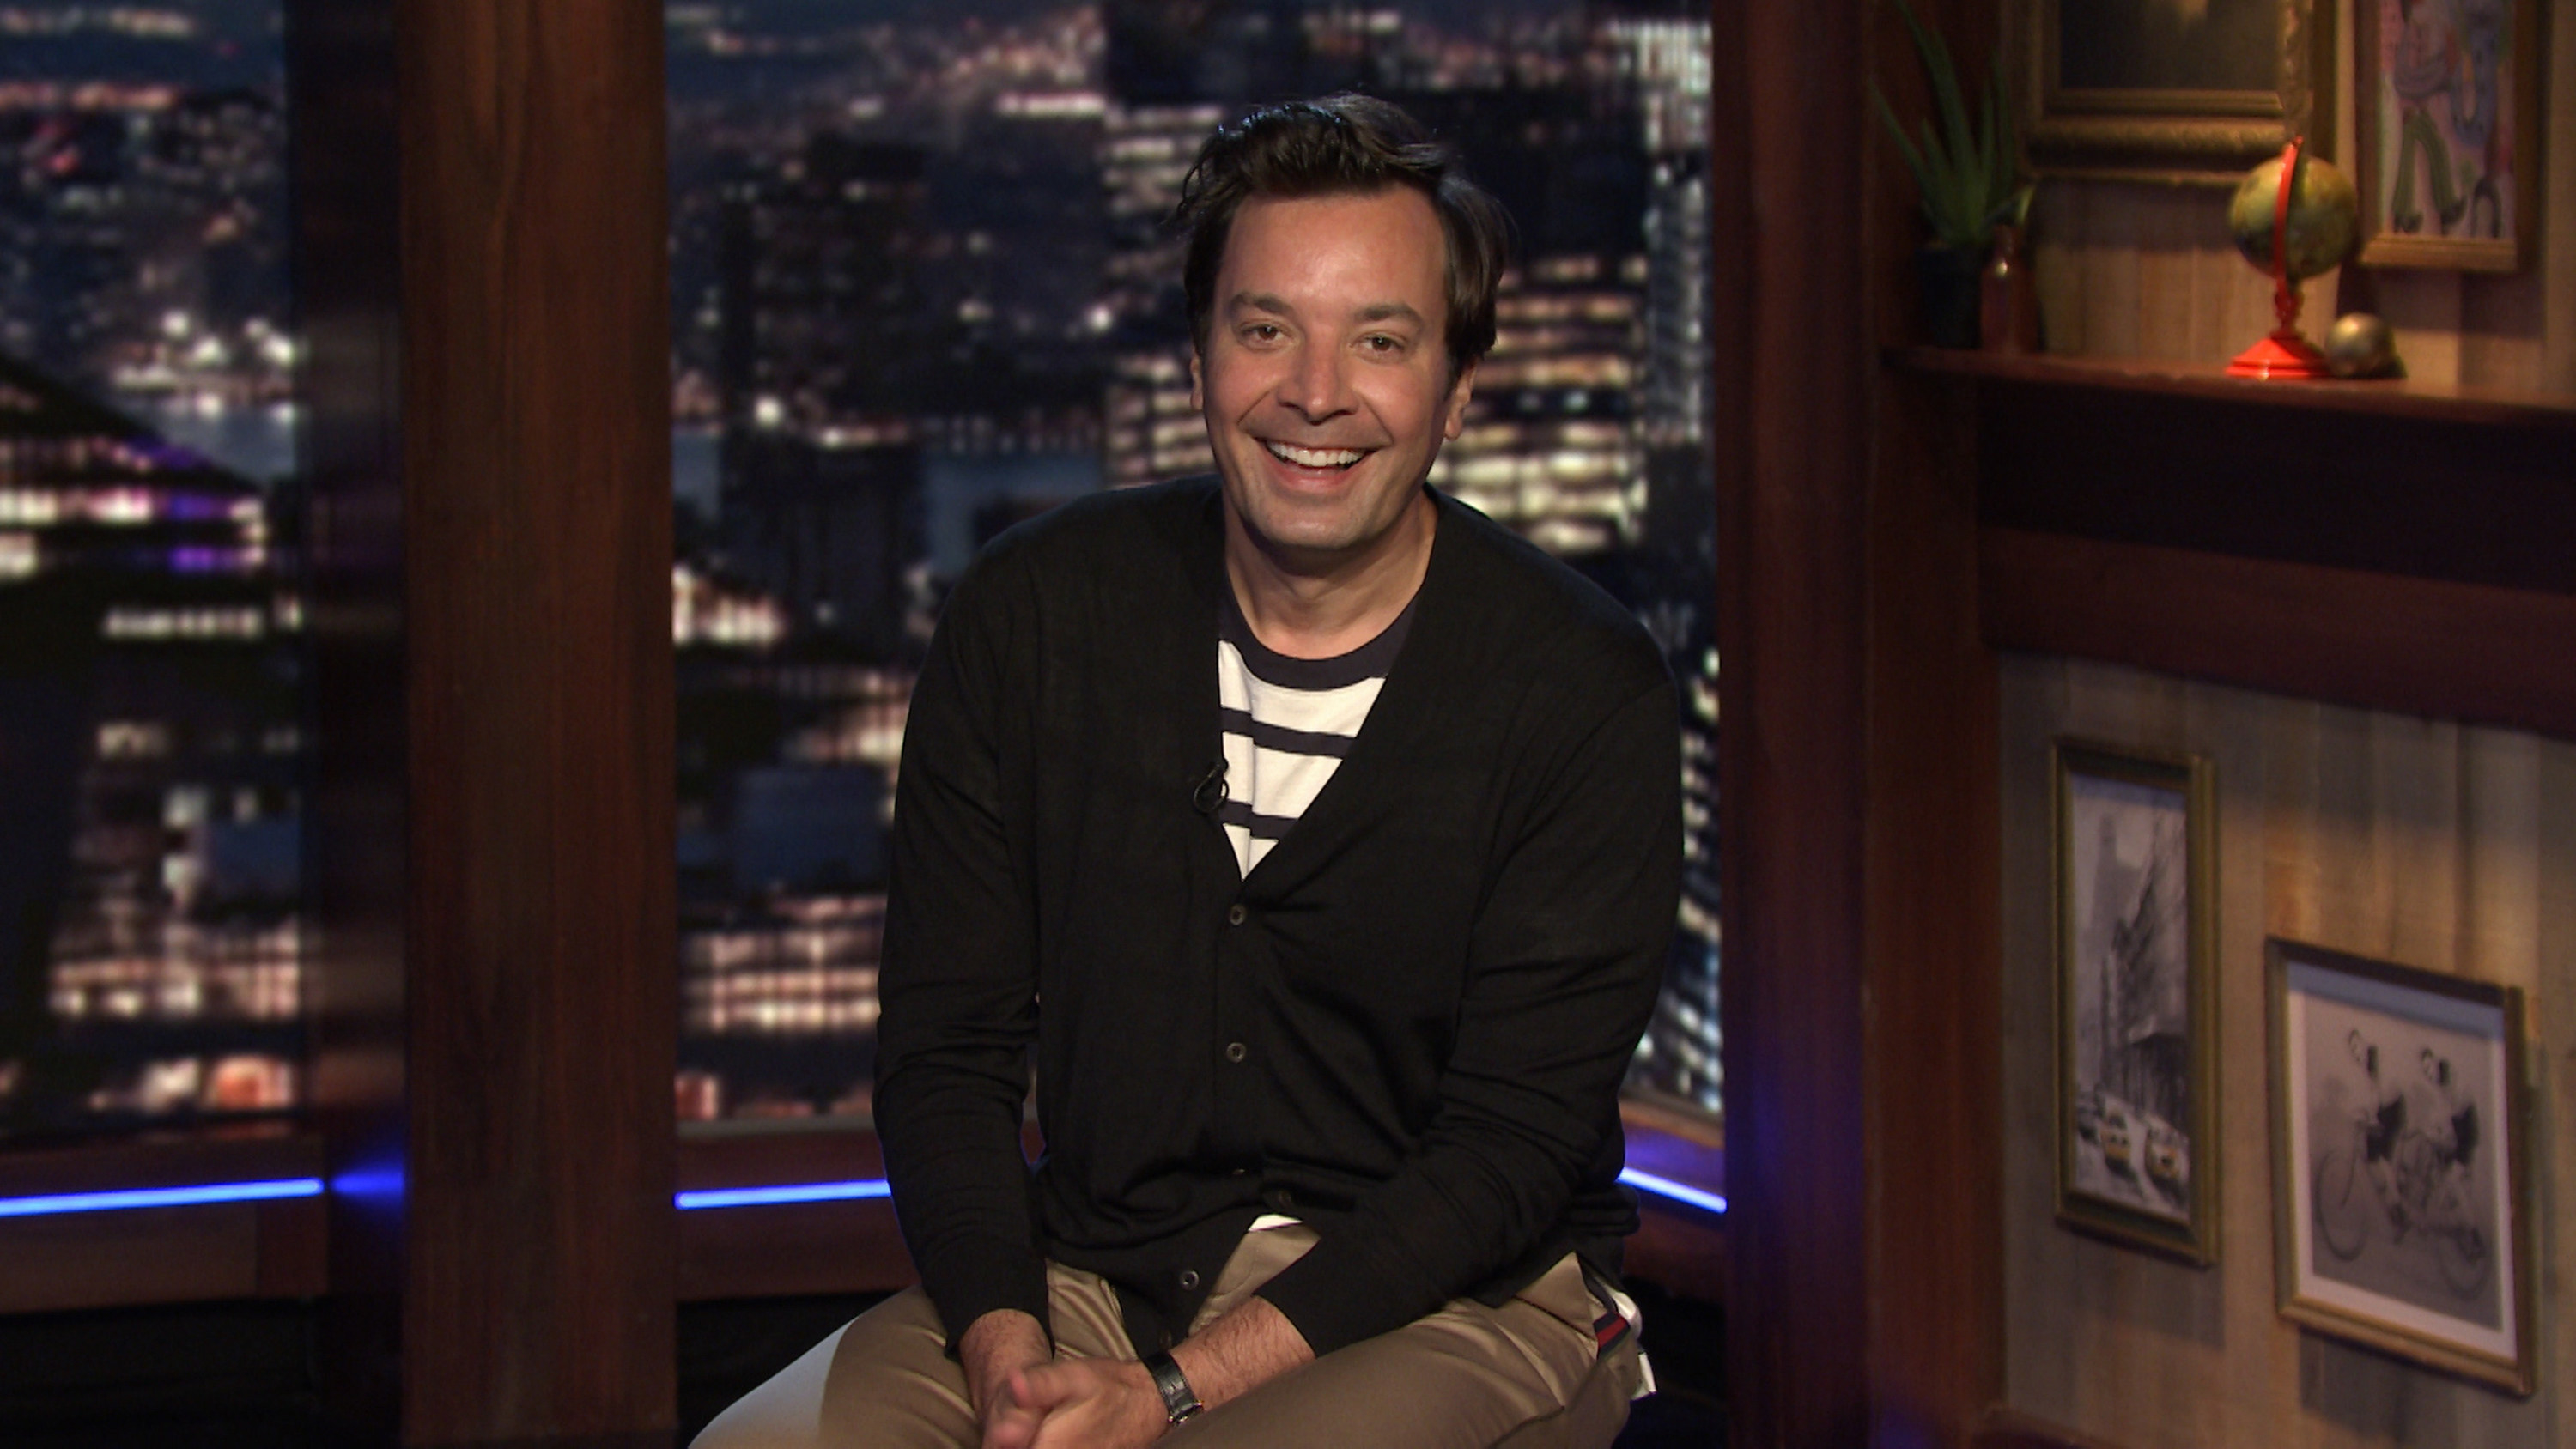 THE TONIGHT SHOW STARRING JIMMY FALLON -- Episode 1290A -- Pictured in this screengrab: Host Jimmy Fallon delivers the monologue on July 15, 2020 -- (Photo by: NBC/NBCU Photo Bank via Getty Images)